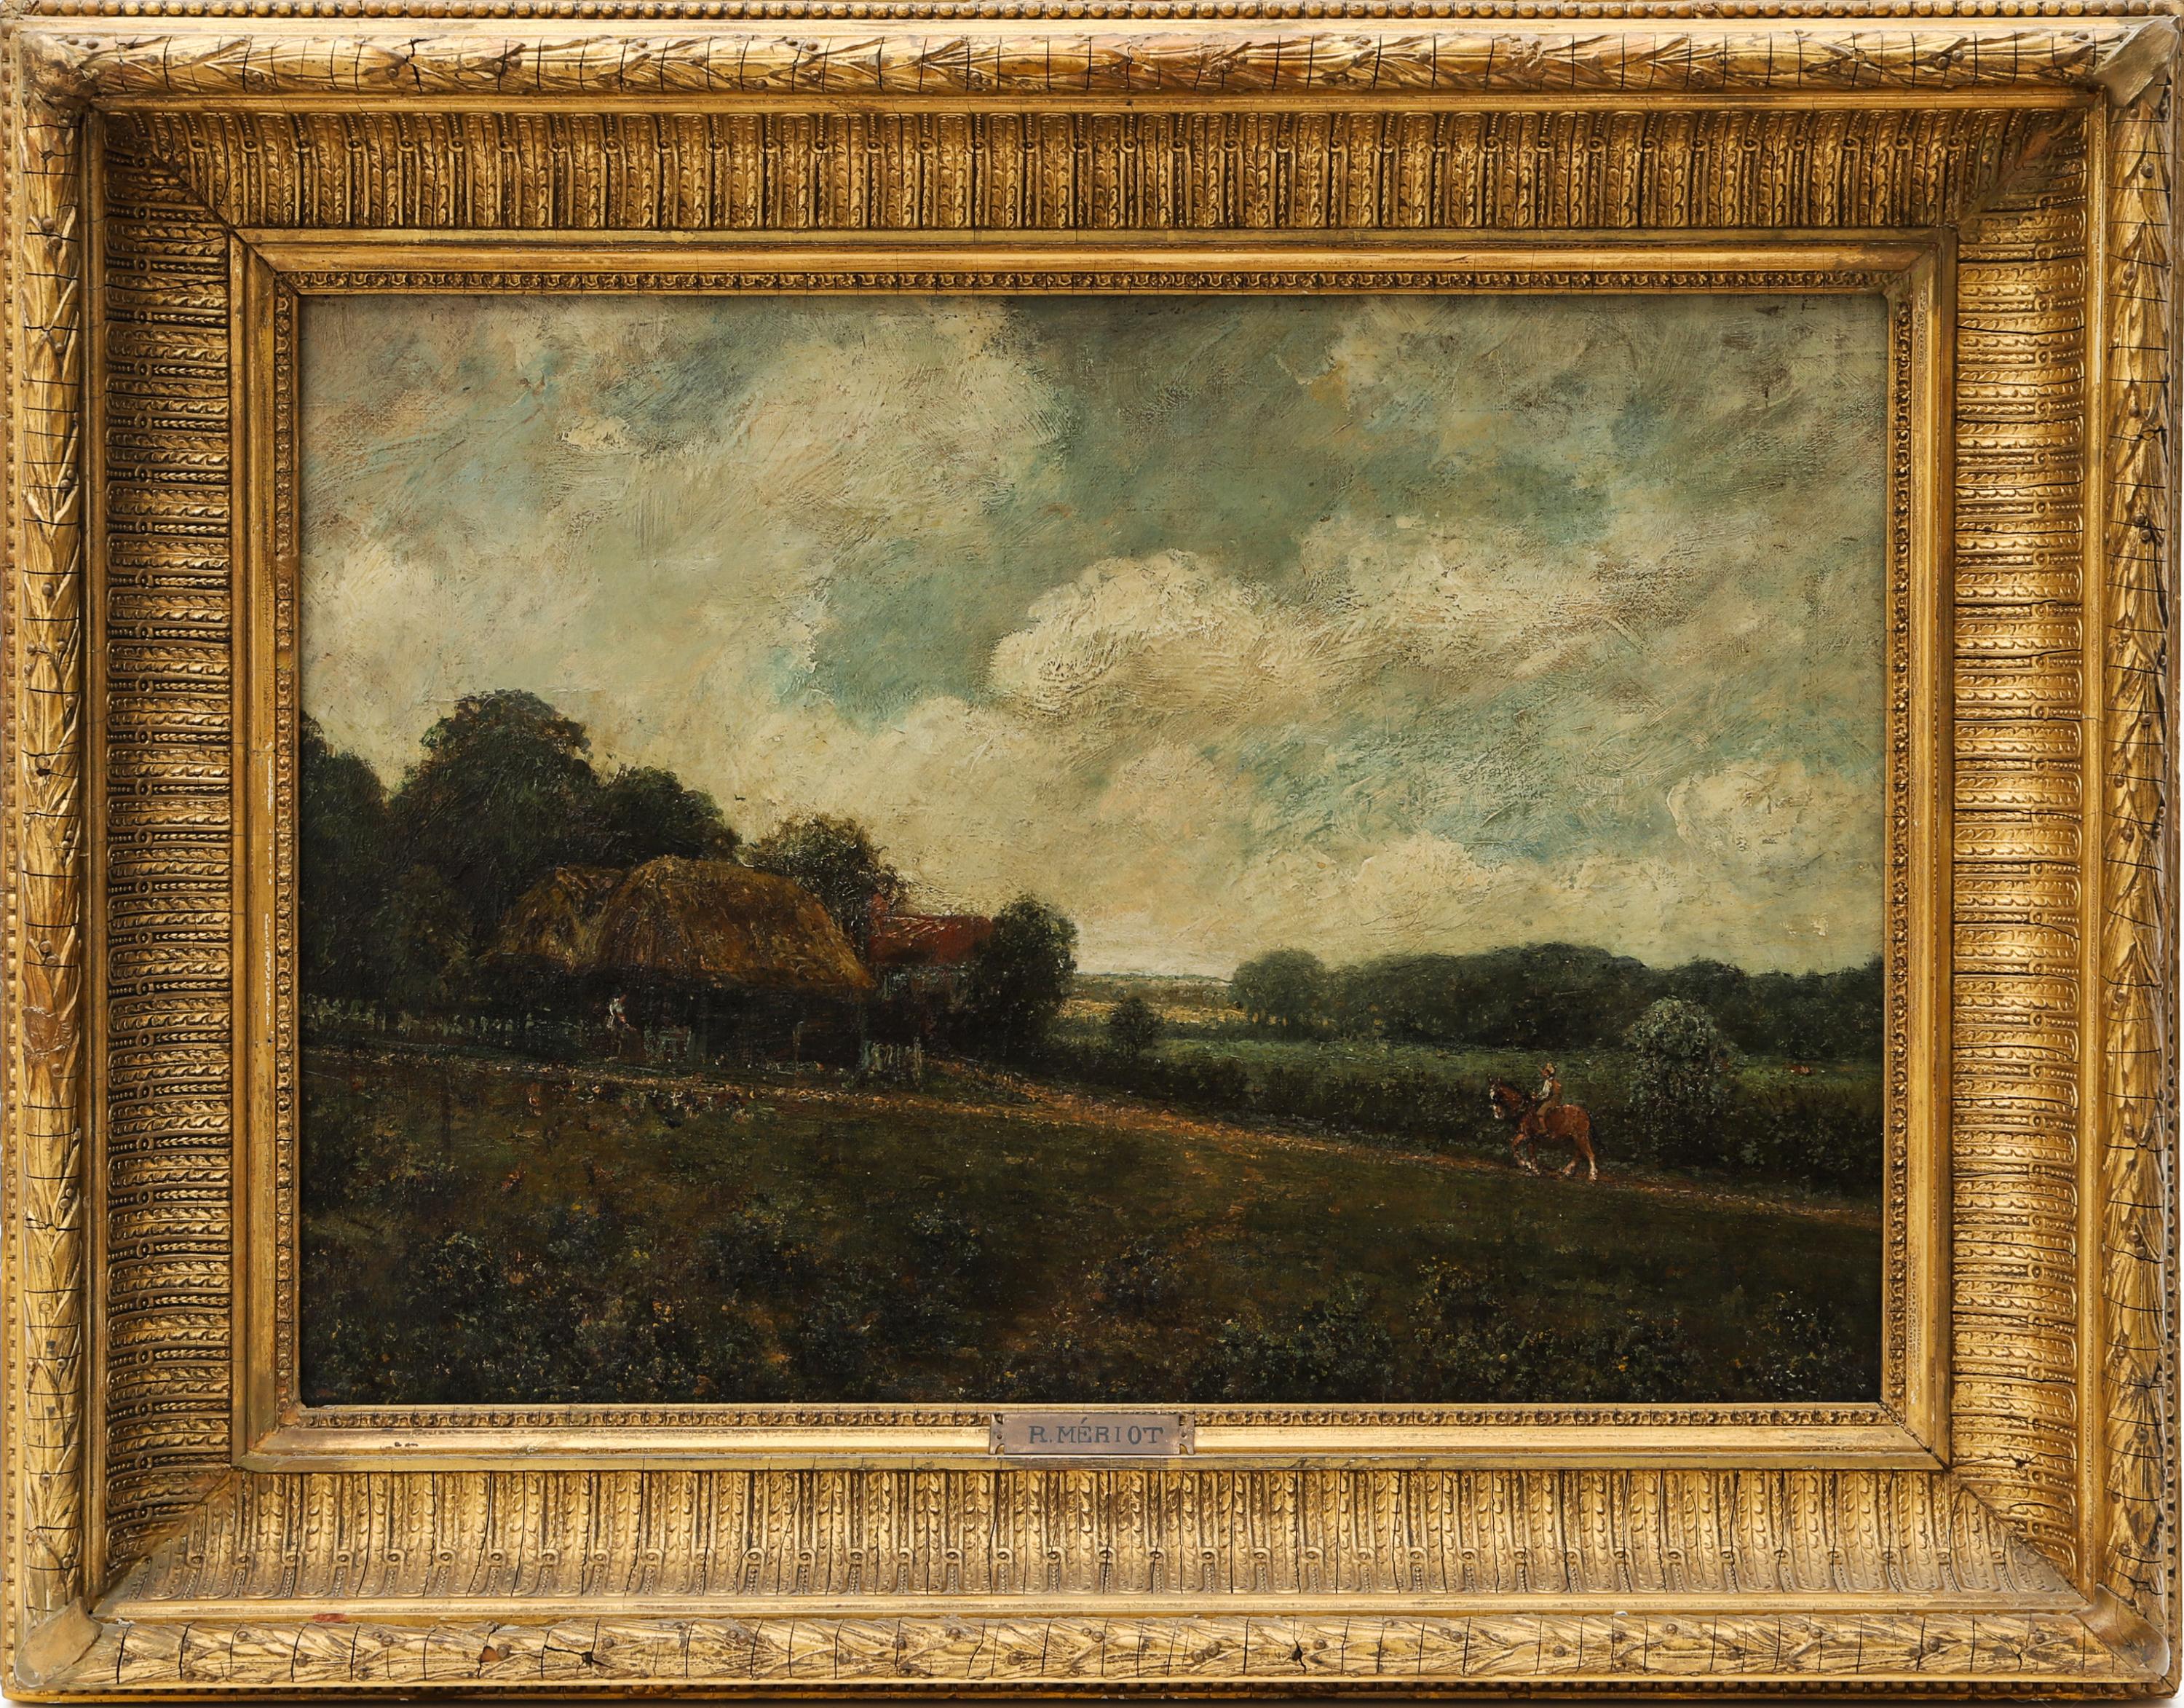 Unknown Landscape Painting - Landscape With Farmhouse, Farmers and a Horse by R.Meriot, French 19th Century